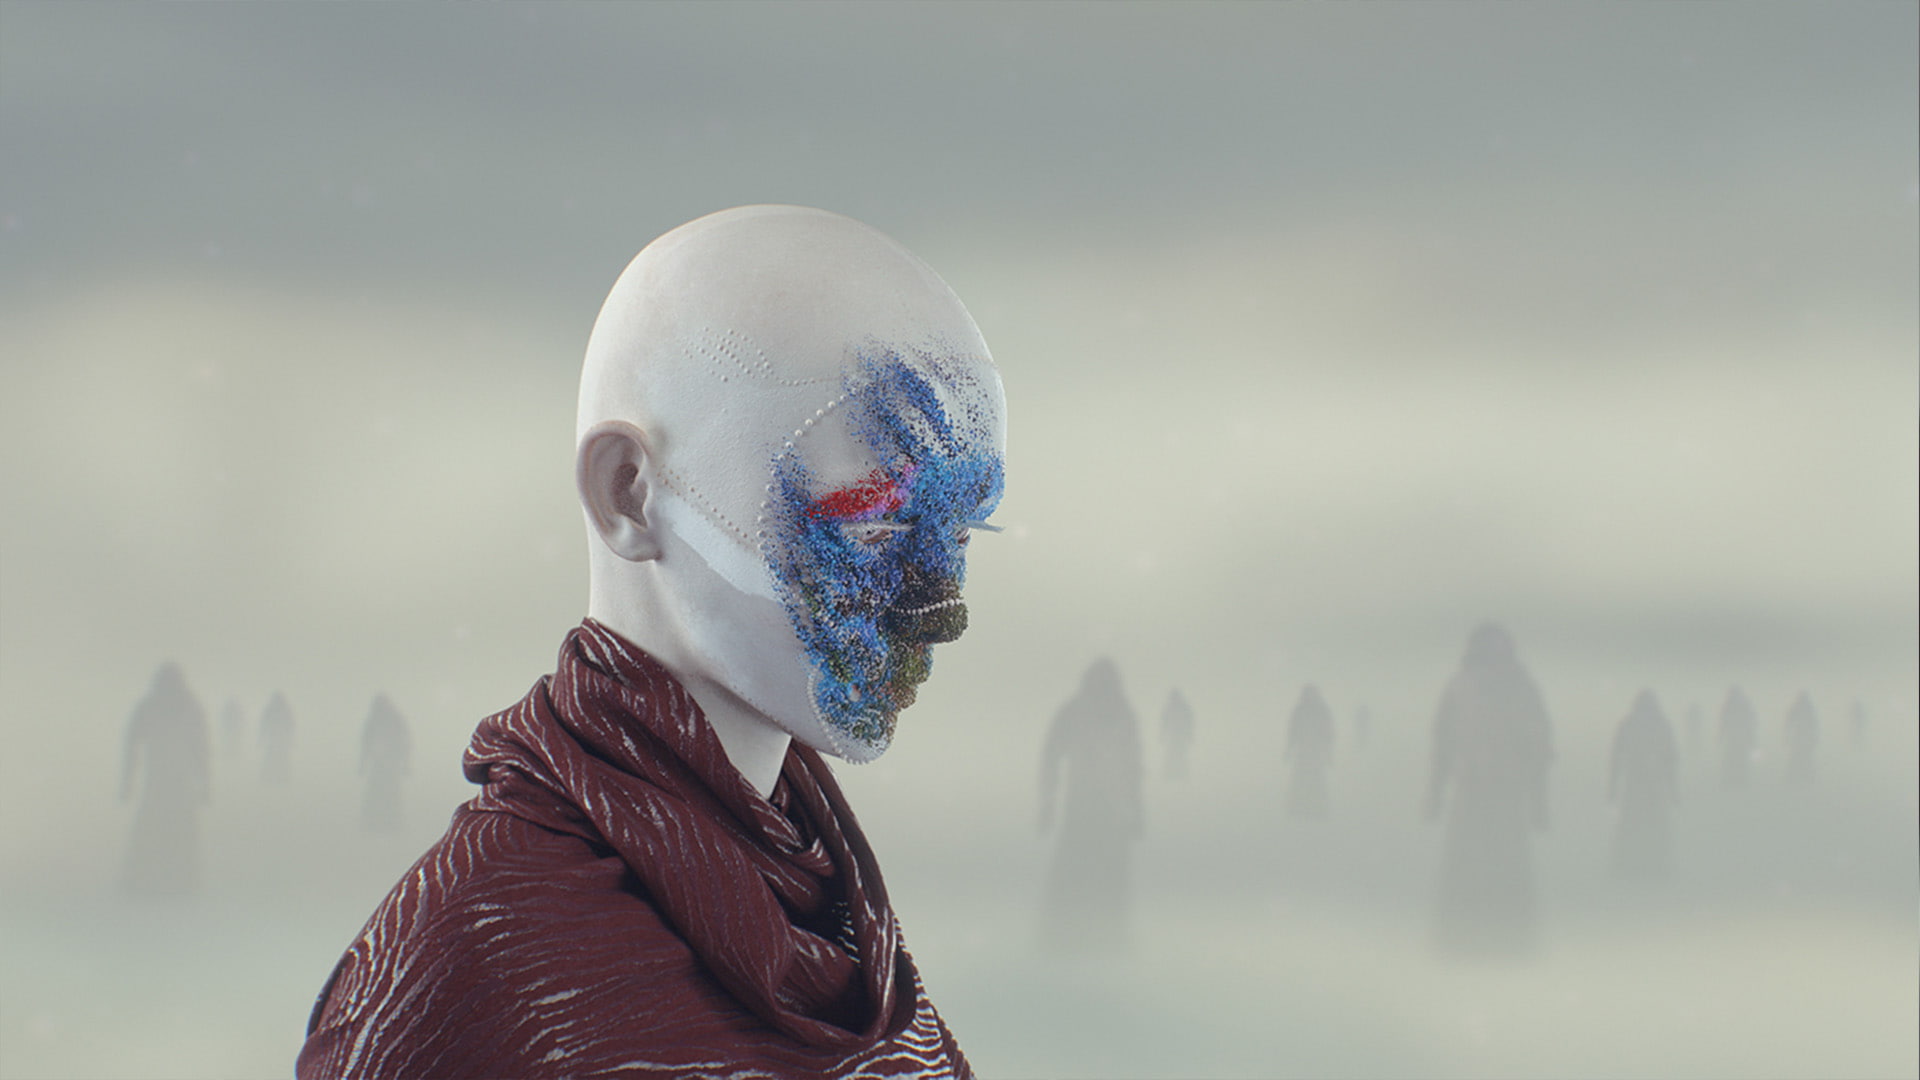 surreal, abstract, photo manipulation, fog, one person, real people